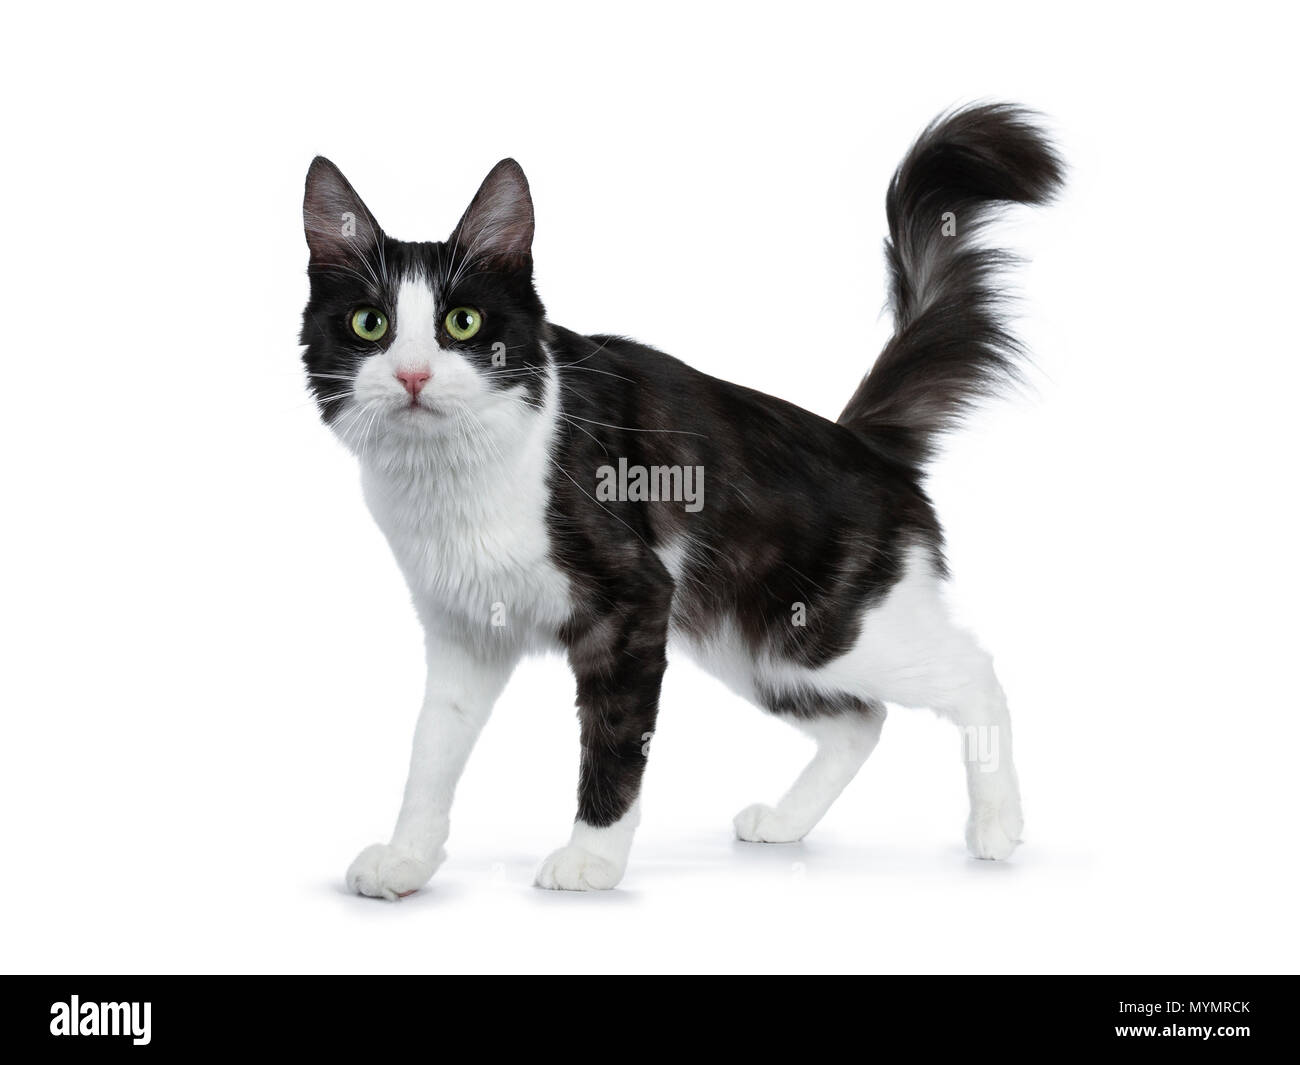 Cute black smoke with white Turkish Angora cat standing side ways on white background with tail in the air Stock Photo